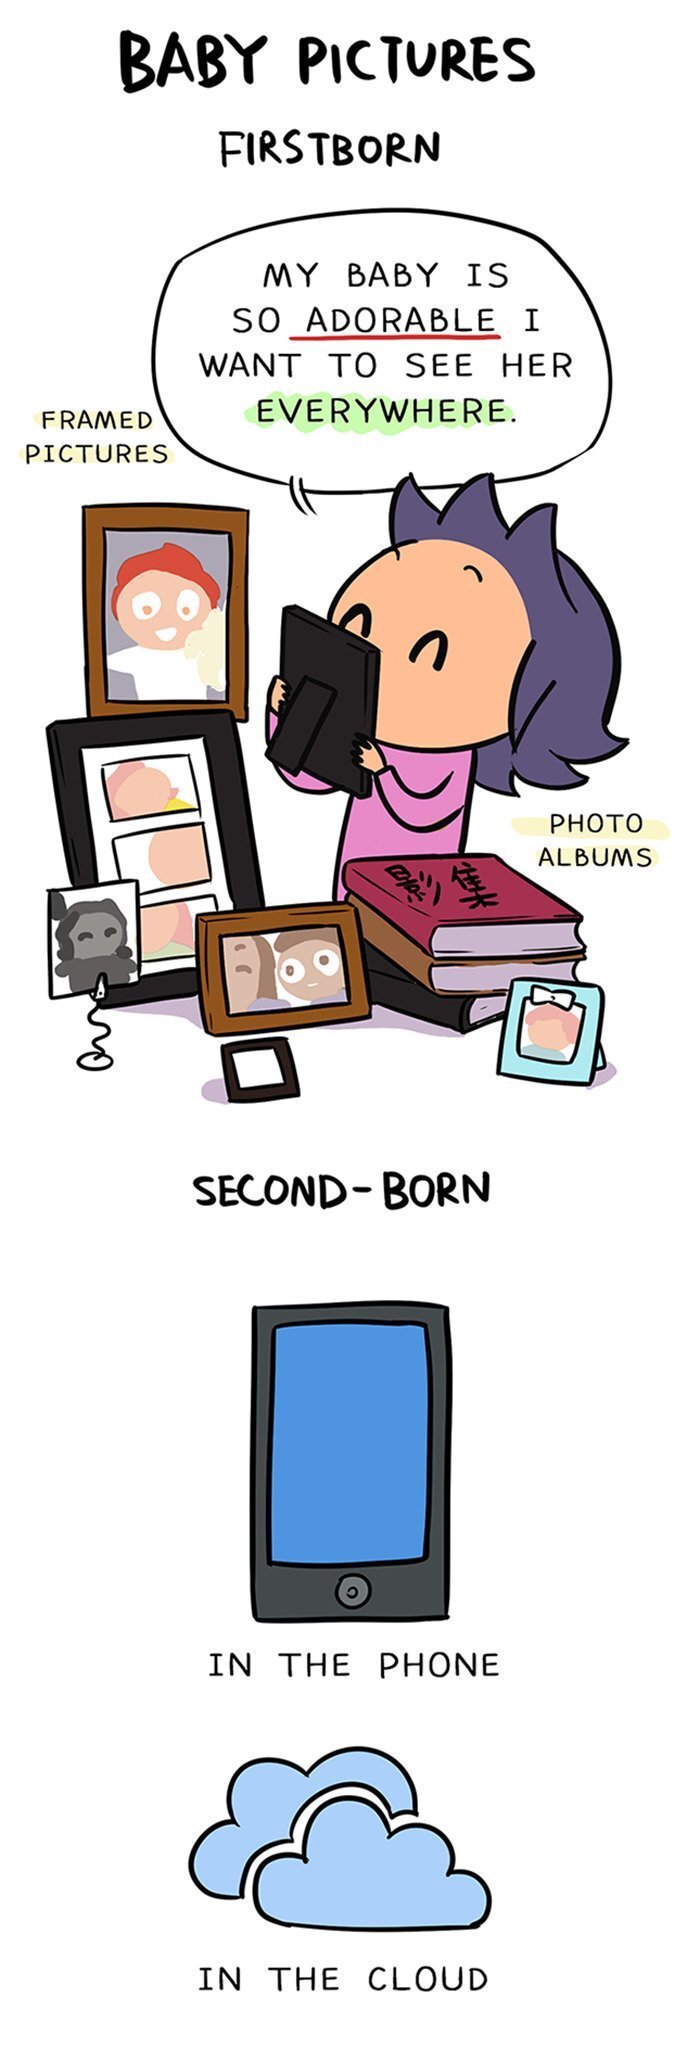 16 Hilariously Honest Comics Reveal The Difference Between Having The First Vs. Second Child